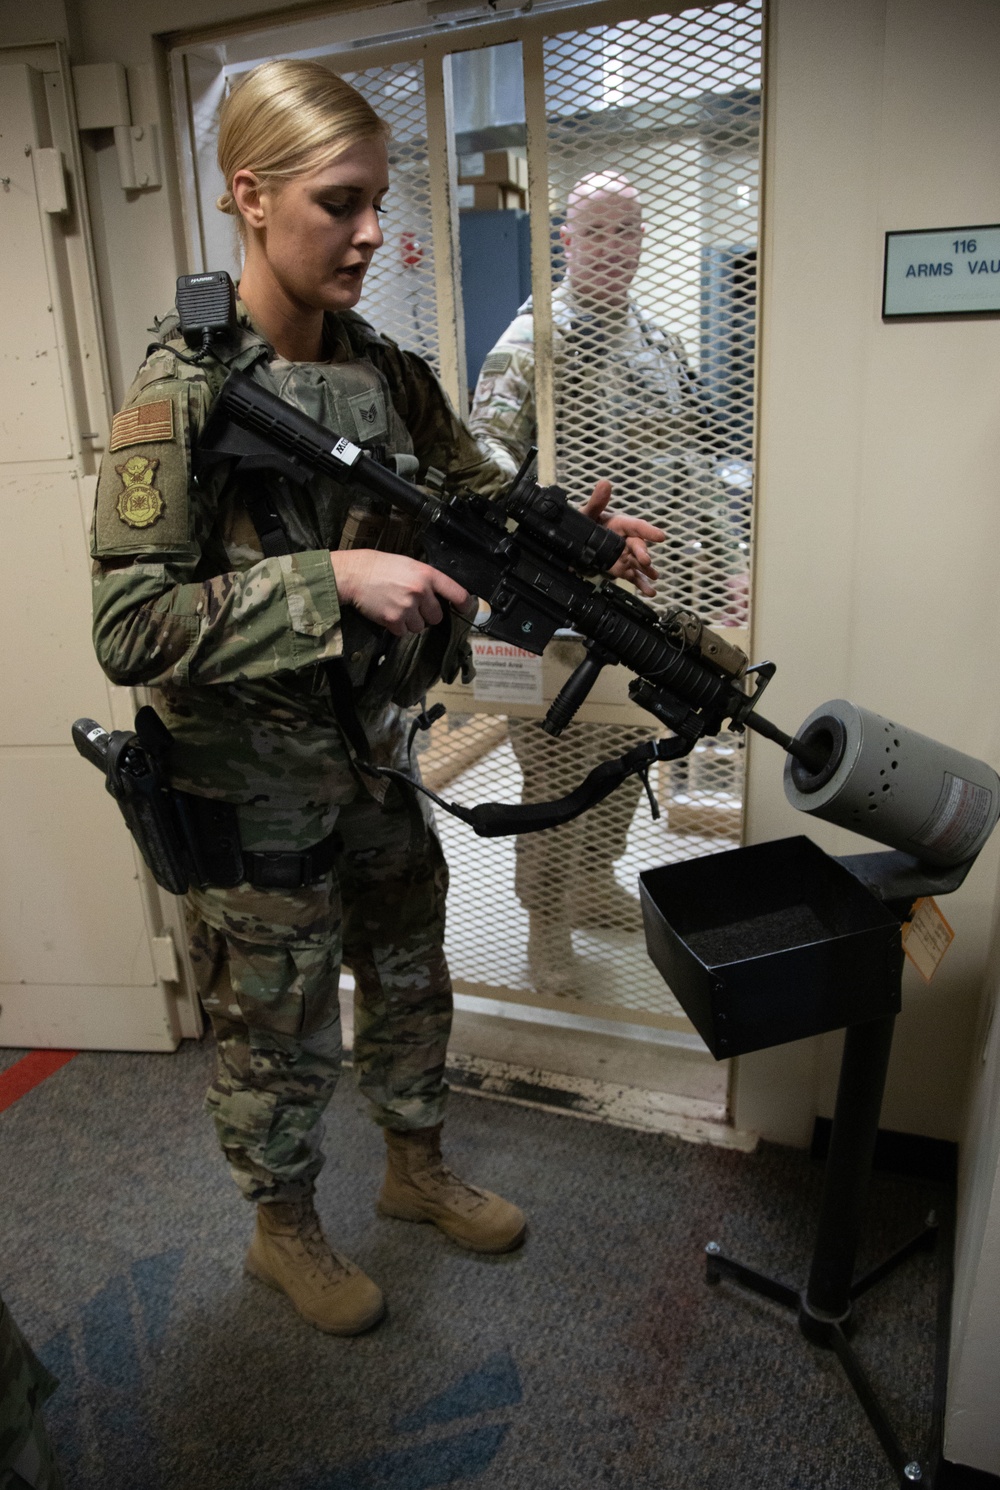 Airman of the 151 Security Forces Squadron respond to the call of thier Governor in a time of social crisis and rioting to protect citizens of Utah.